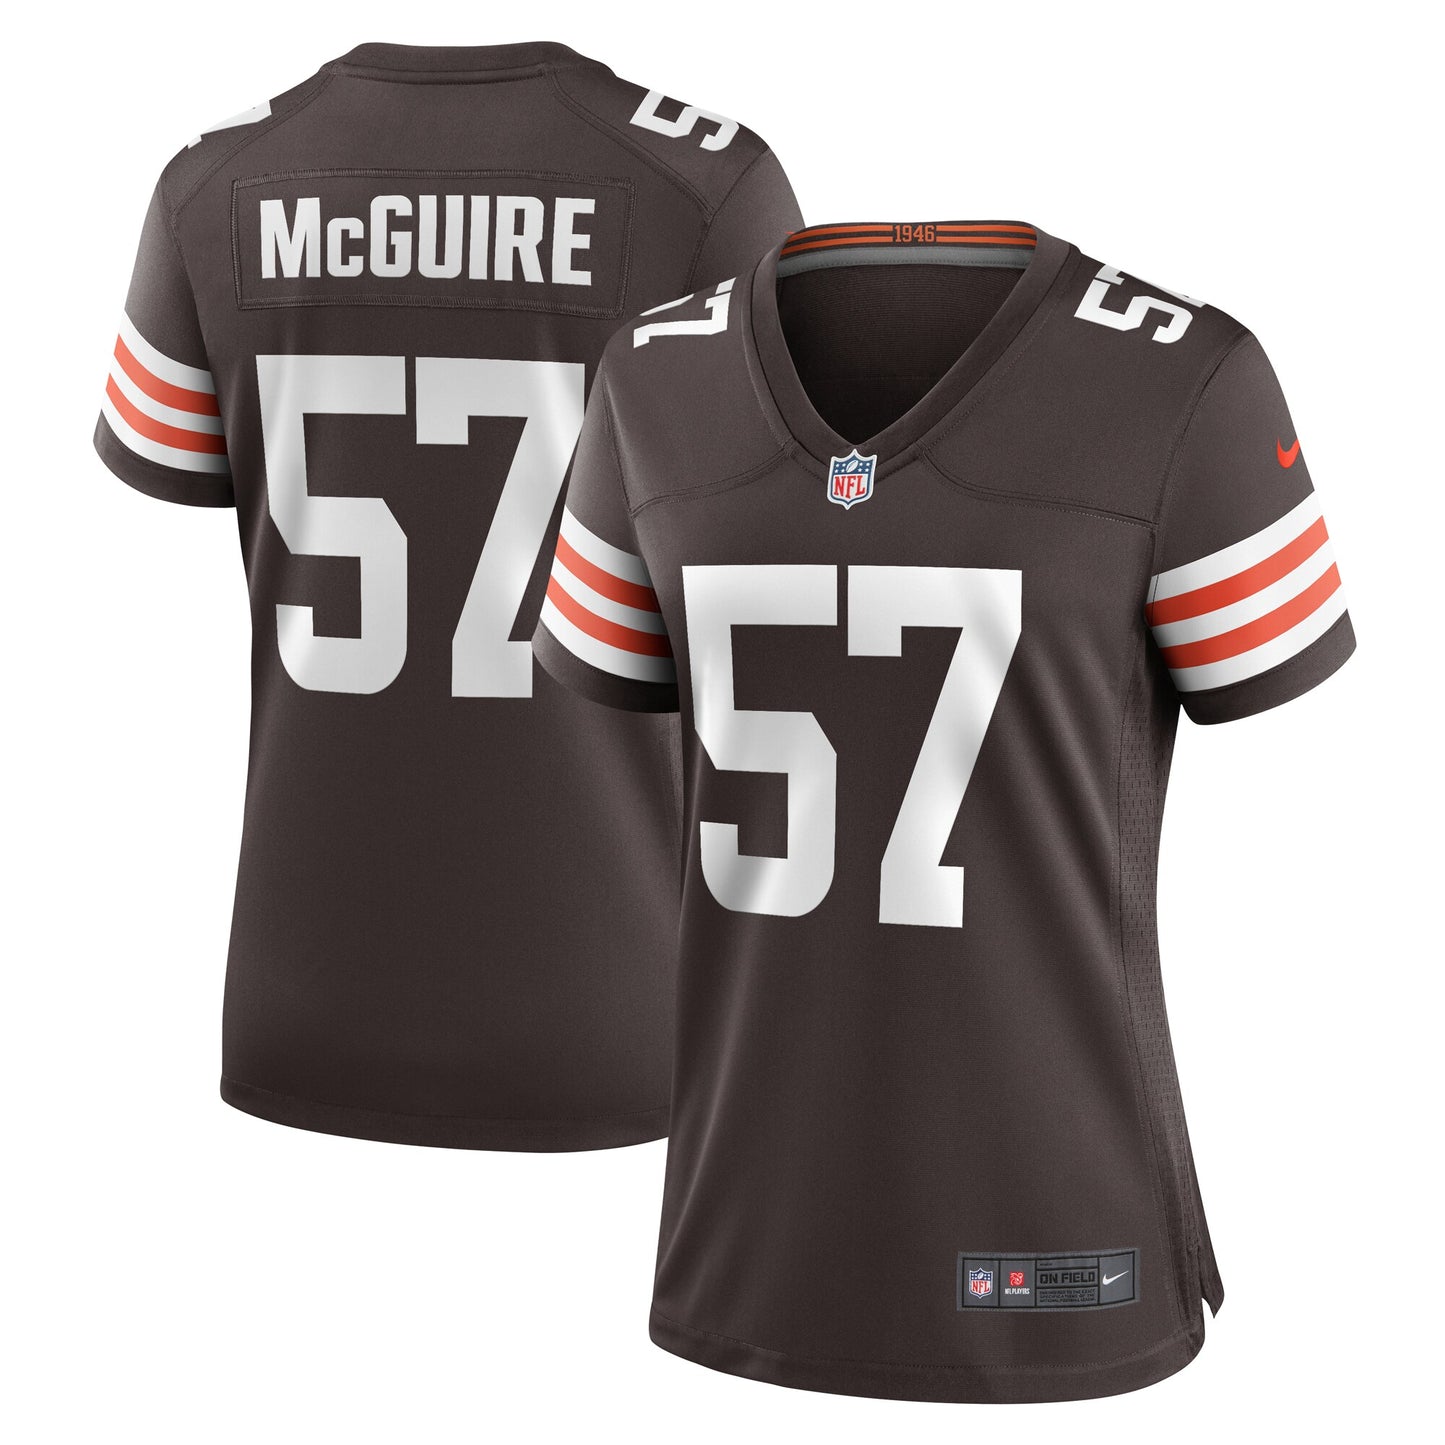 Isaiah McGuire Cleveland Browns Nike Women's Team Game Jersey - Brown